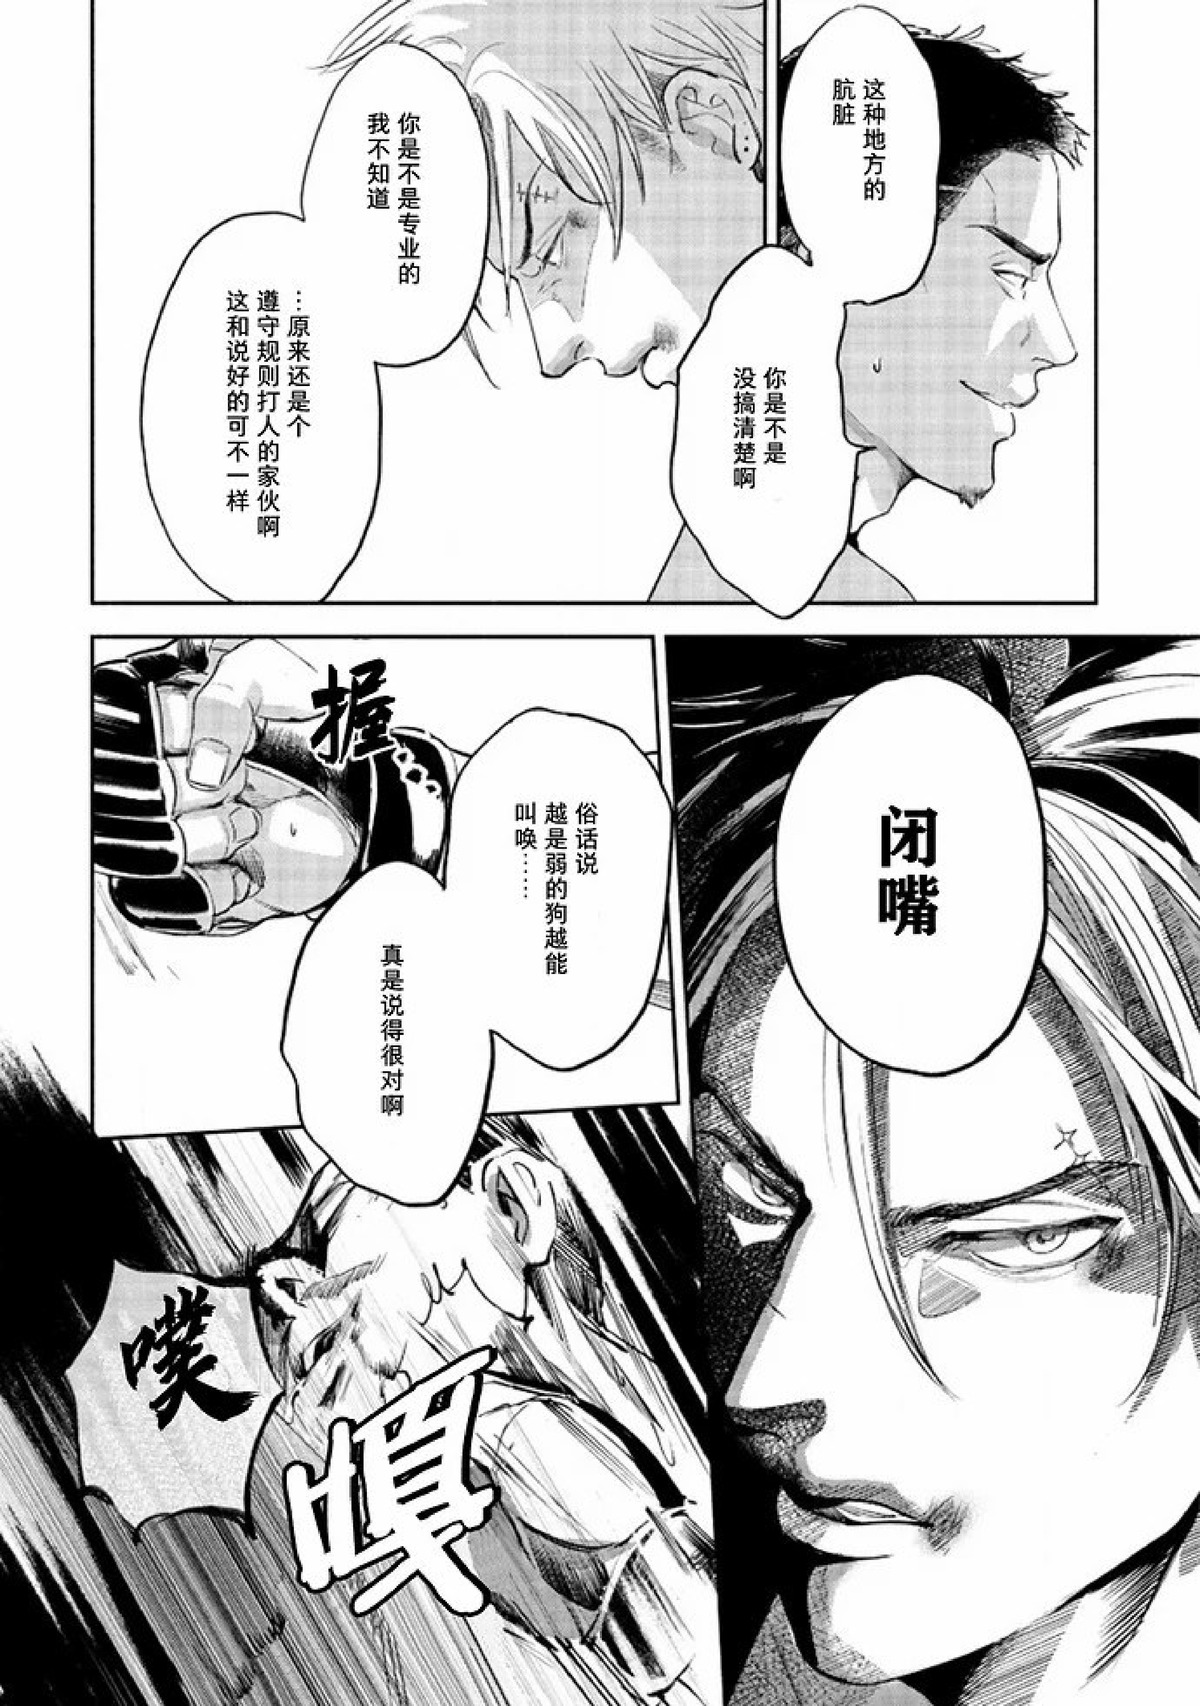 【Two sides of the same coin[耽美]】漫画-（上卷01-02）章节漫画下拉式图片-70.jpg